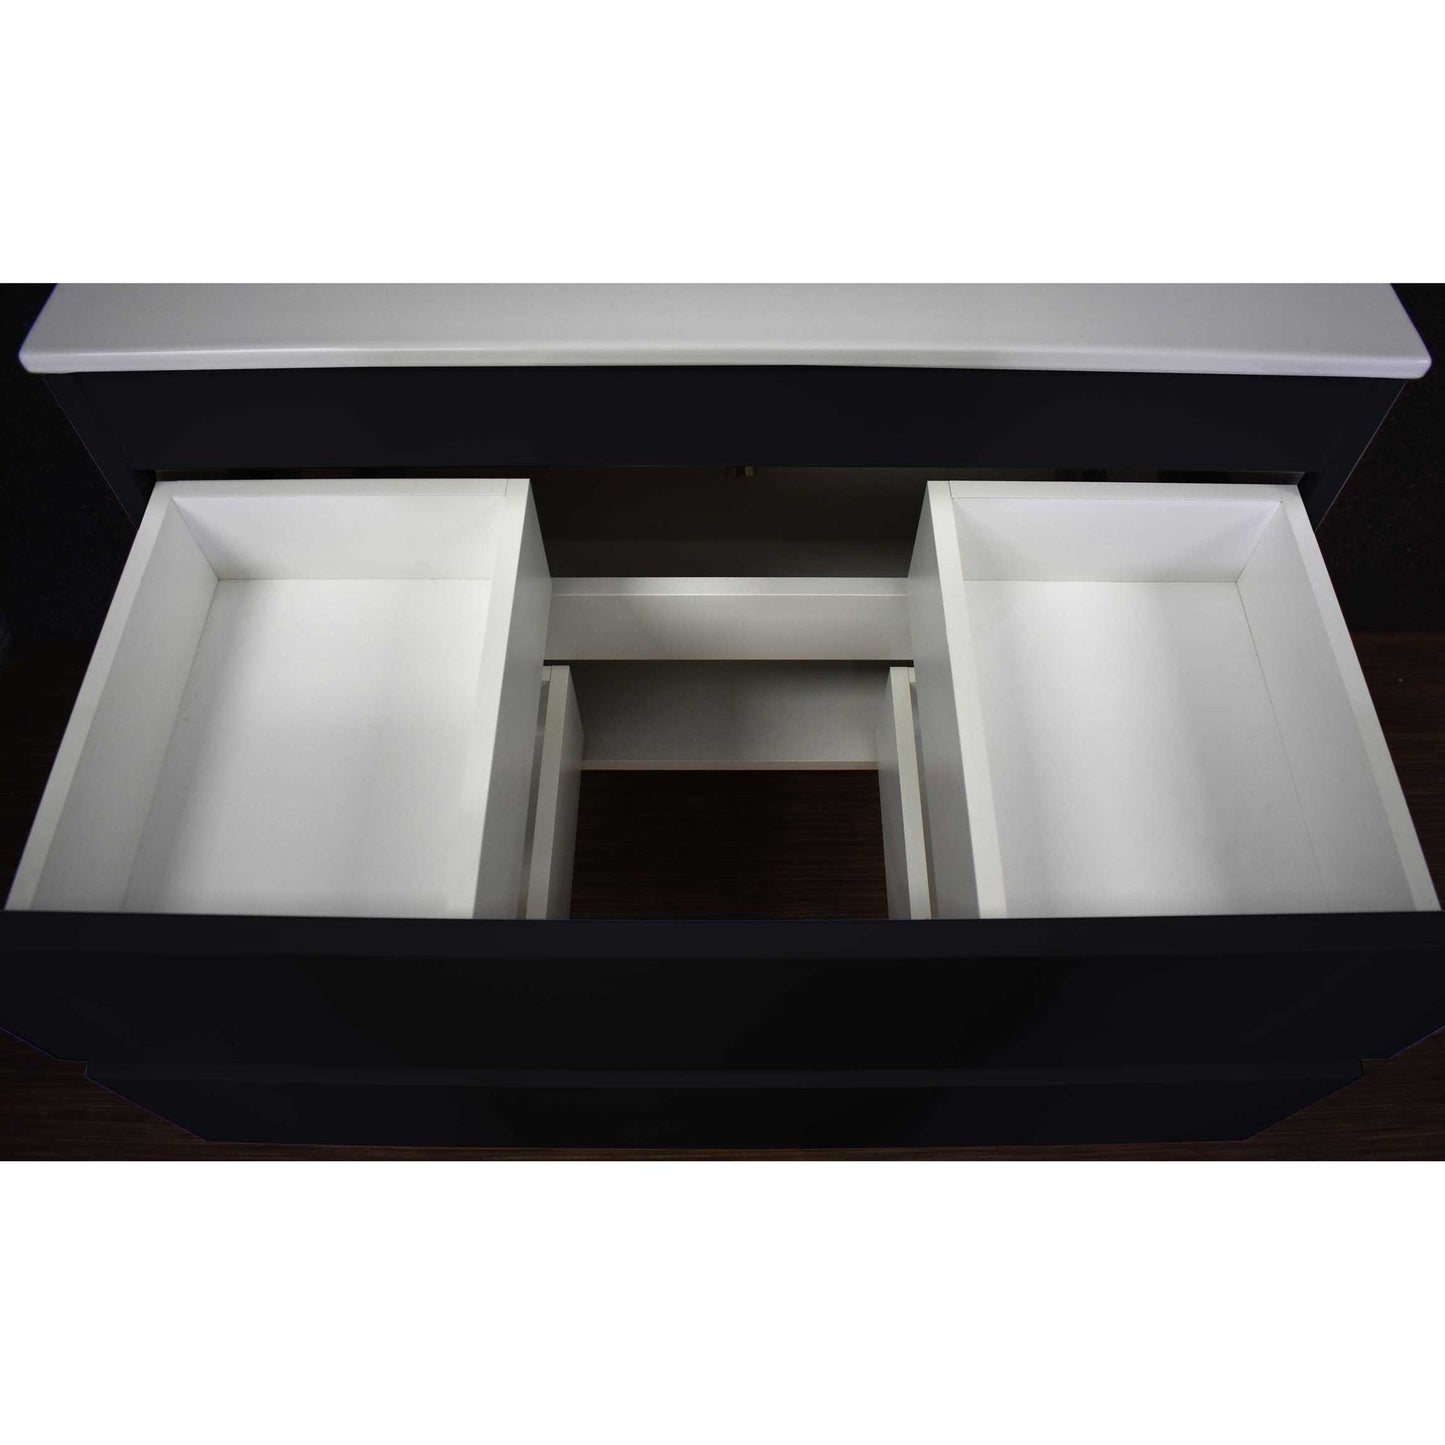 Volpa USA Salt 36" x 20" Black Wall-Mounted Floating Bathroom Vanity With Drawers, Acrylic Top and Integrated Acrylic Sink